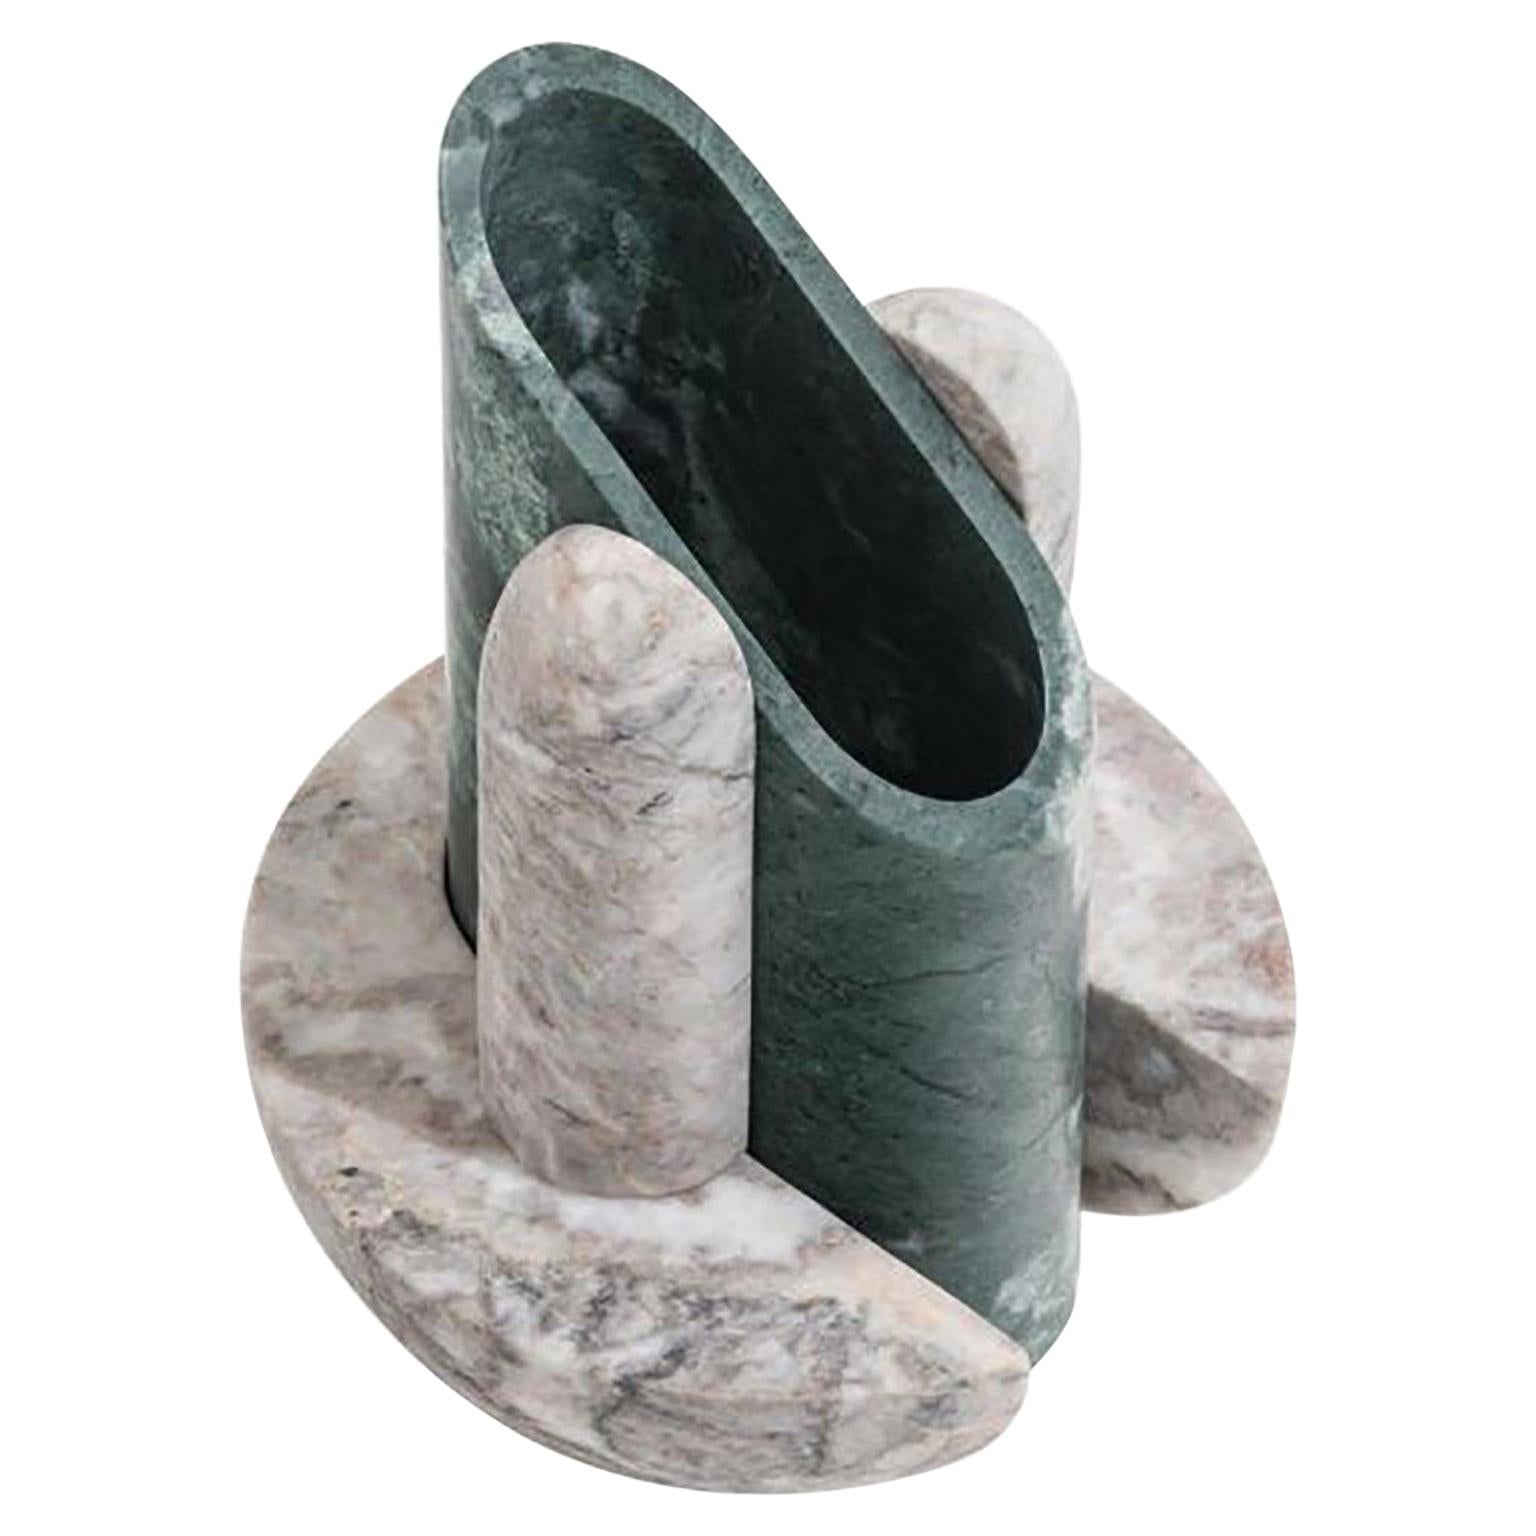 Contemporary Sculptural Geometric Marble Vase Simultaneo, Italian Manufacture For Sale